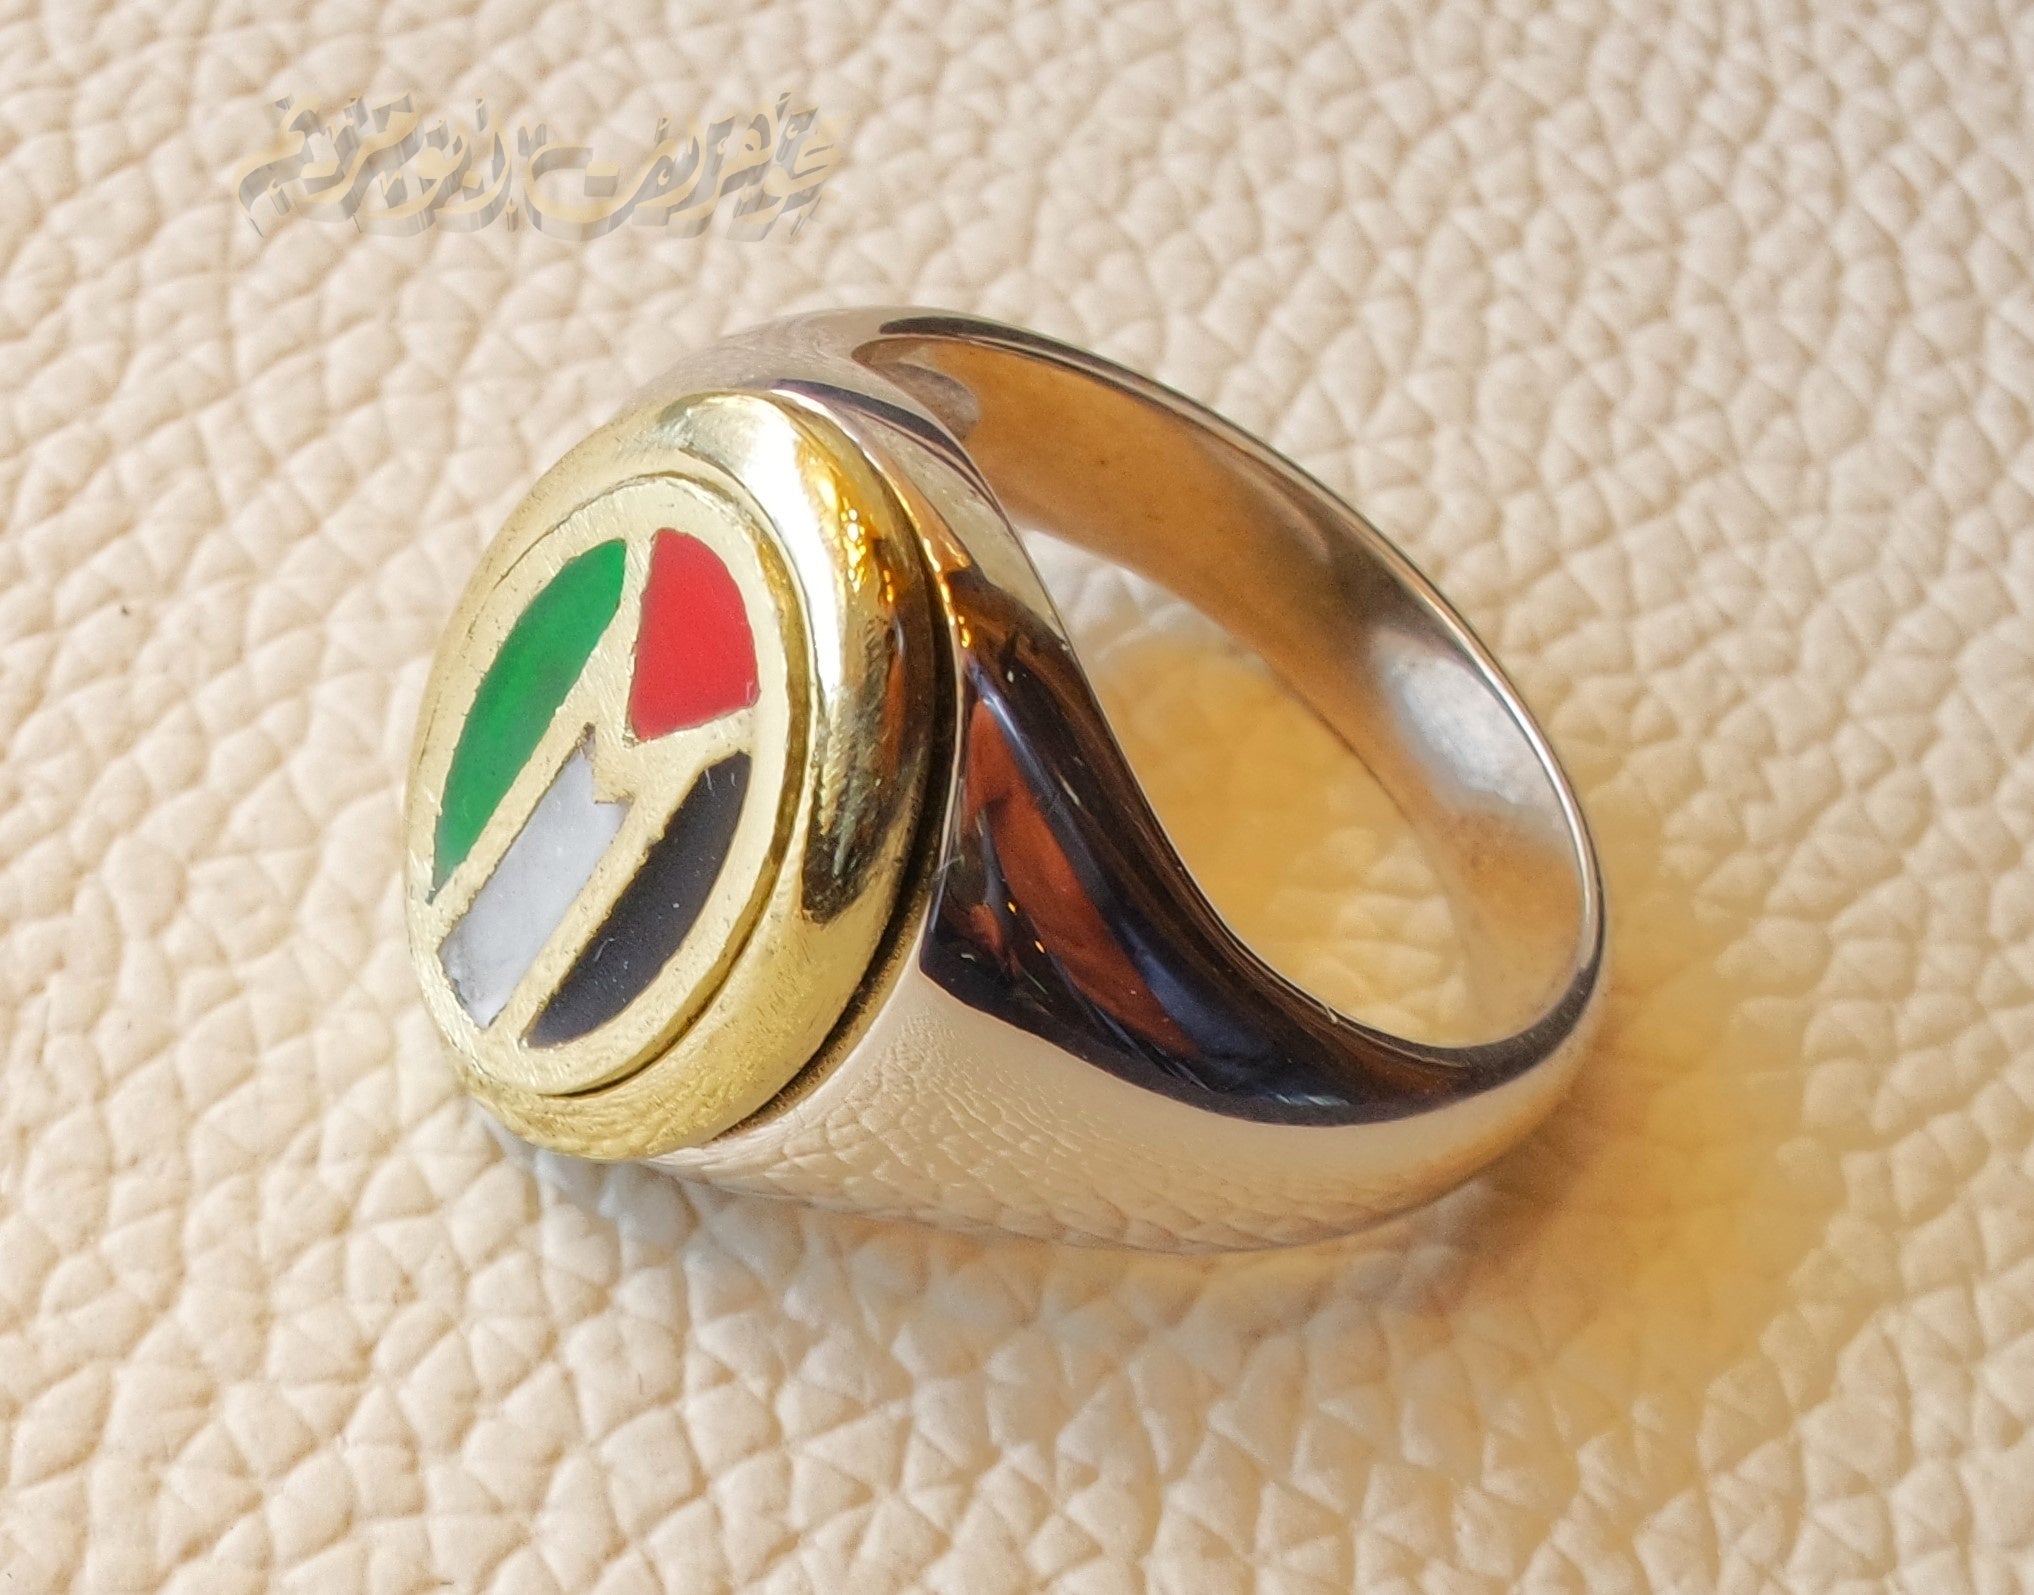 Palestine flag man heavy ring sterling silver and color enamel Arabic bronze frame and ring face style fast shipping all sizes